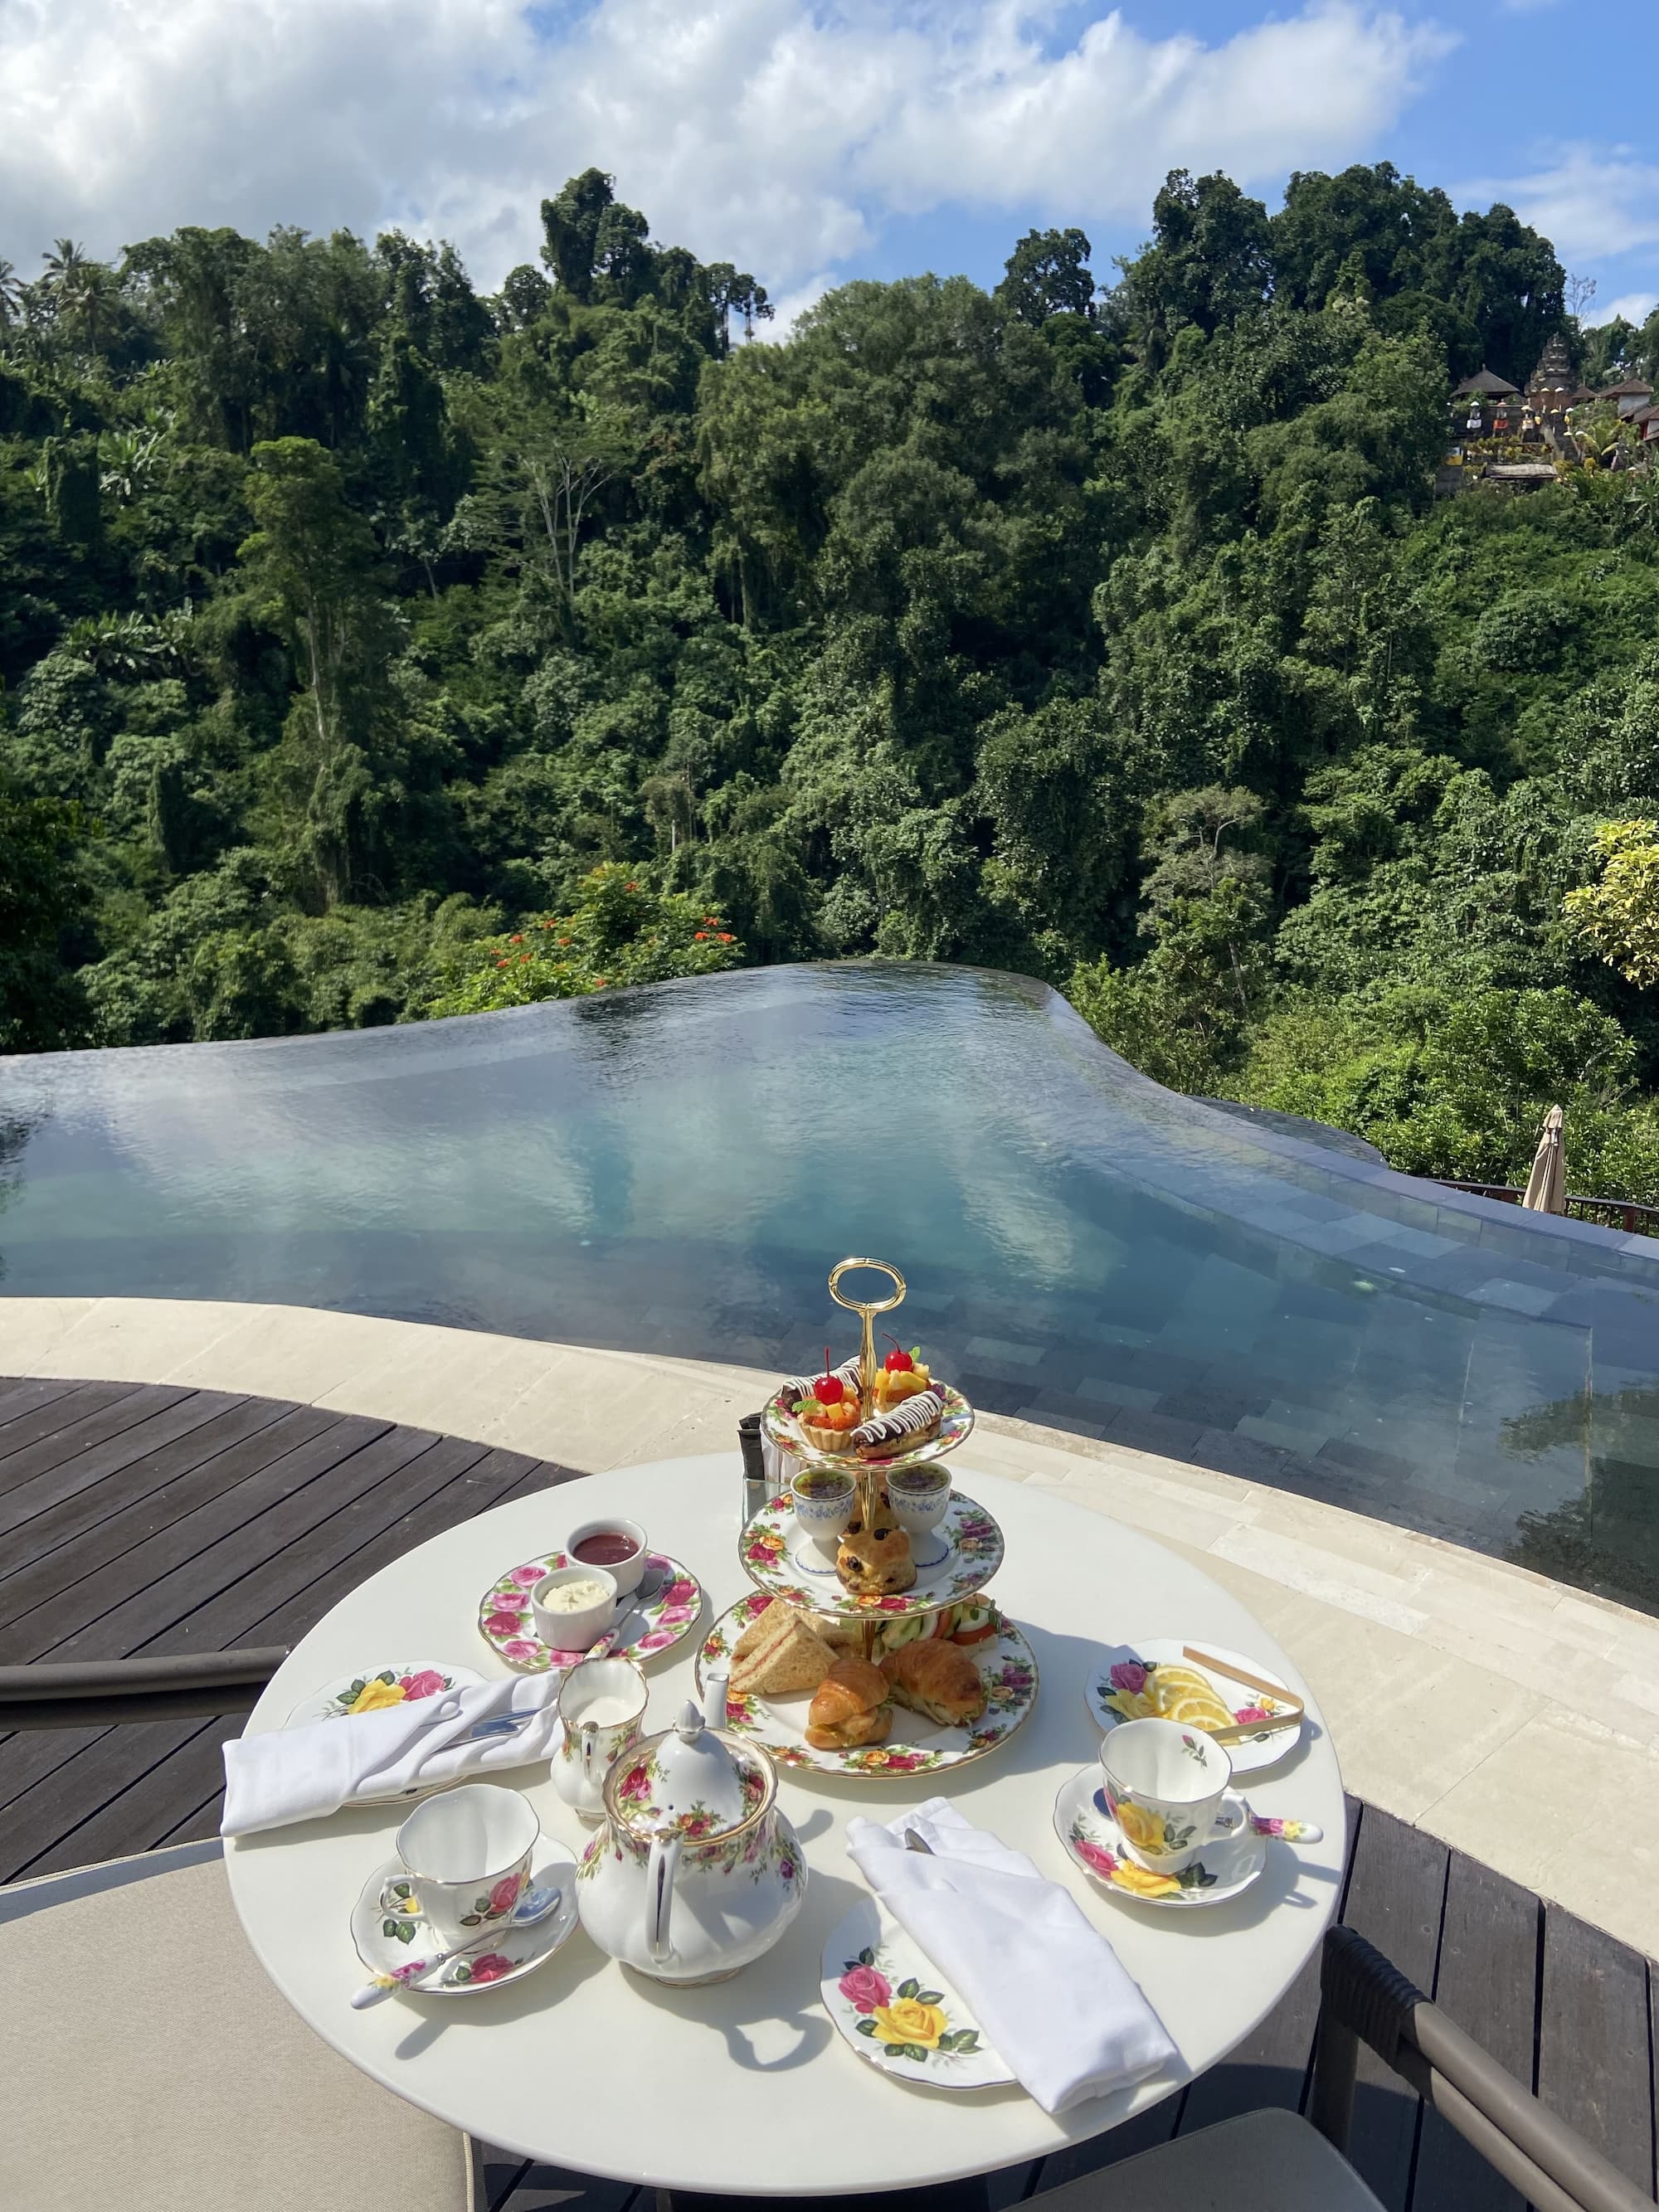 Afternoon high tea in the heart of the jungle 2